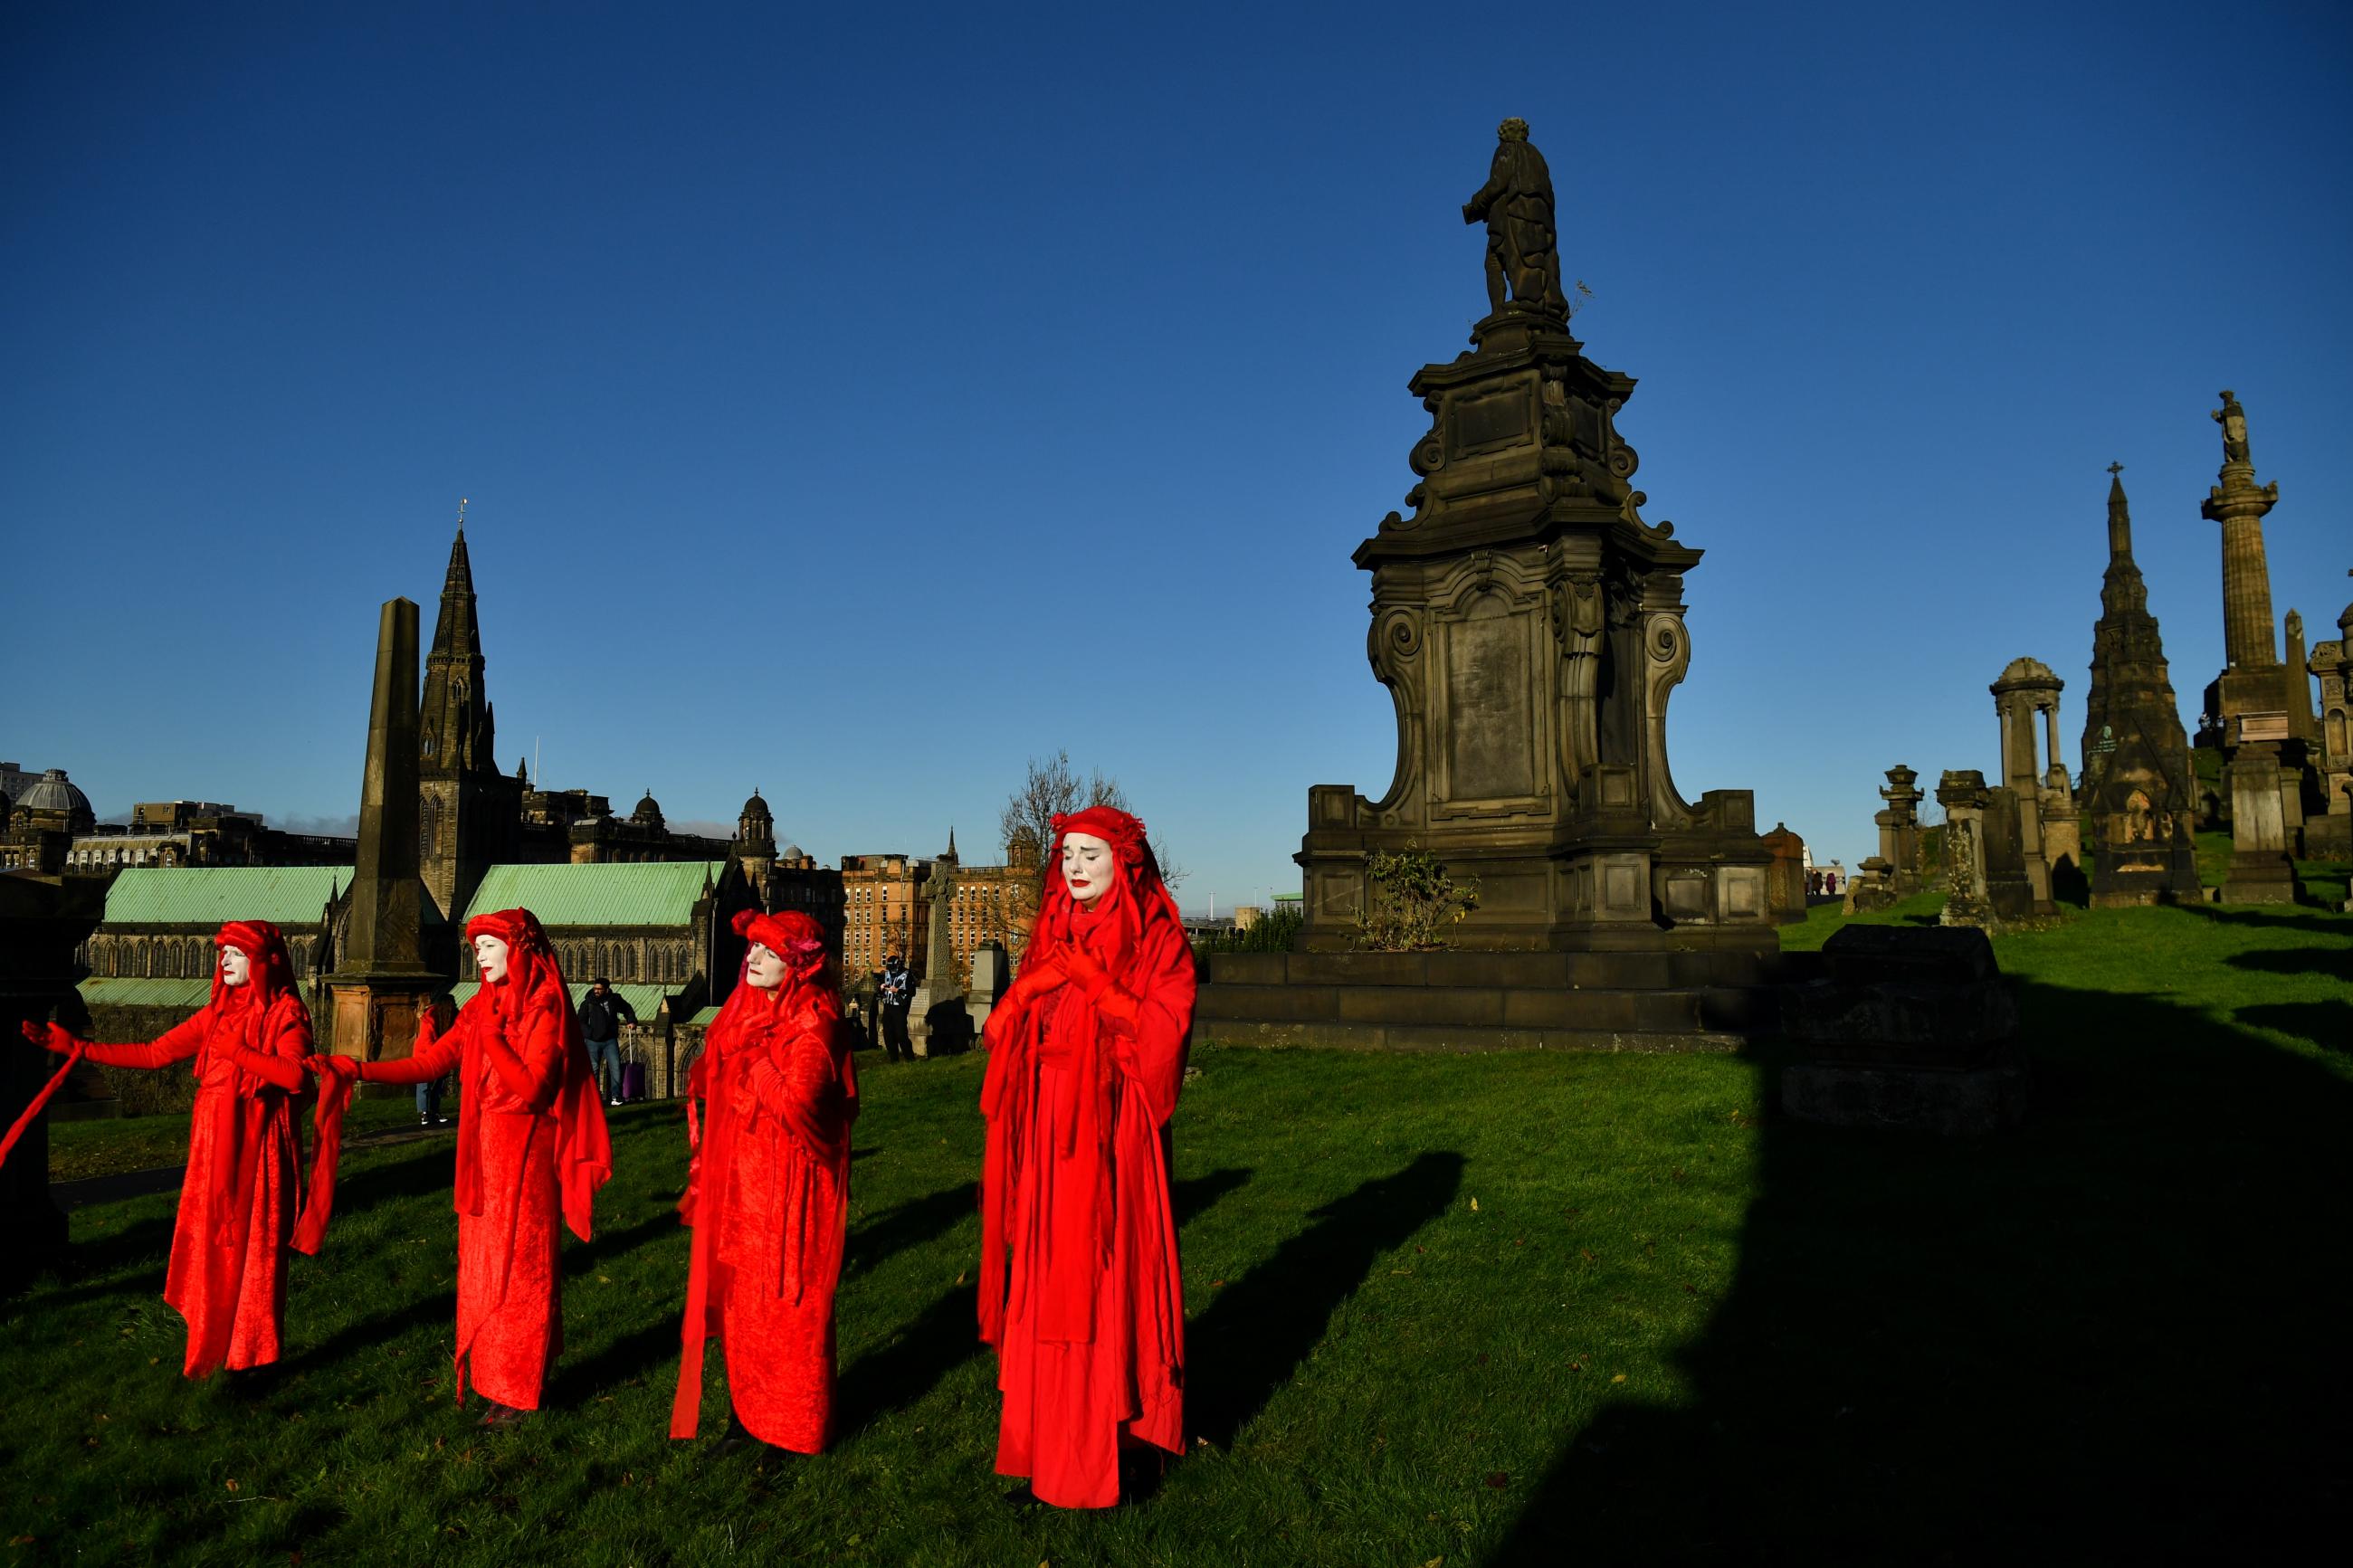 Activists take part in a mock funeral at Glasgow Necropolis during COP26 in Glasgow, Scotland, on November 13, 2021.